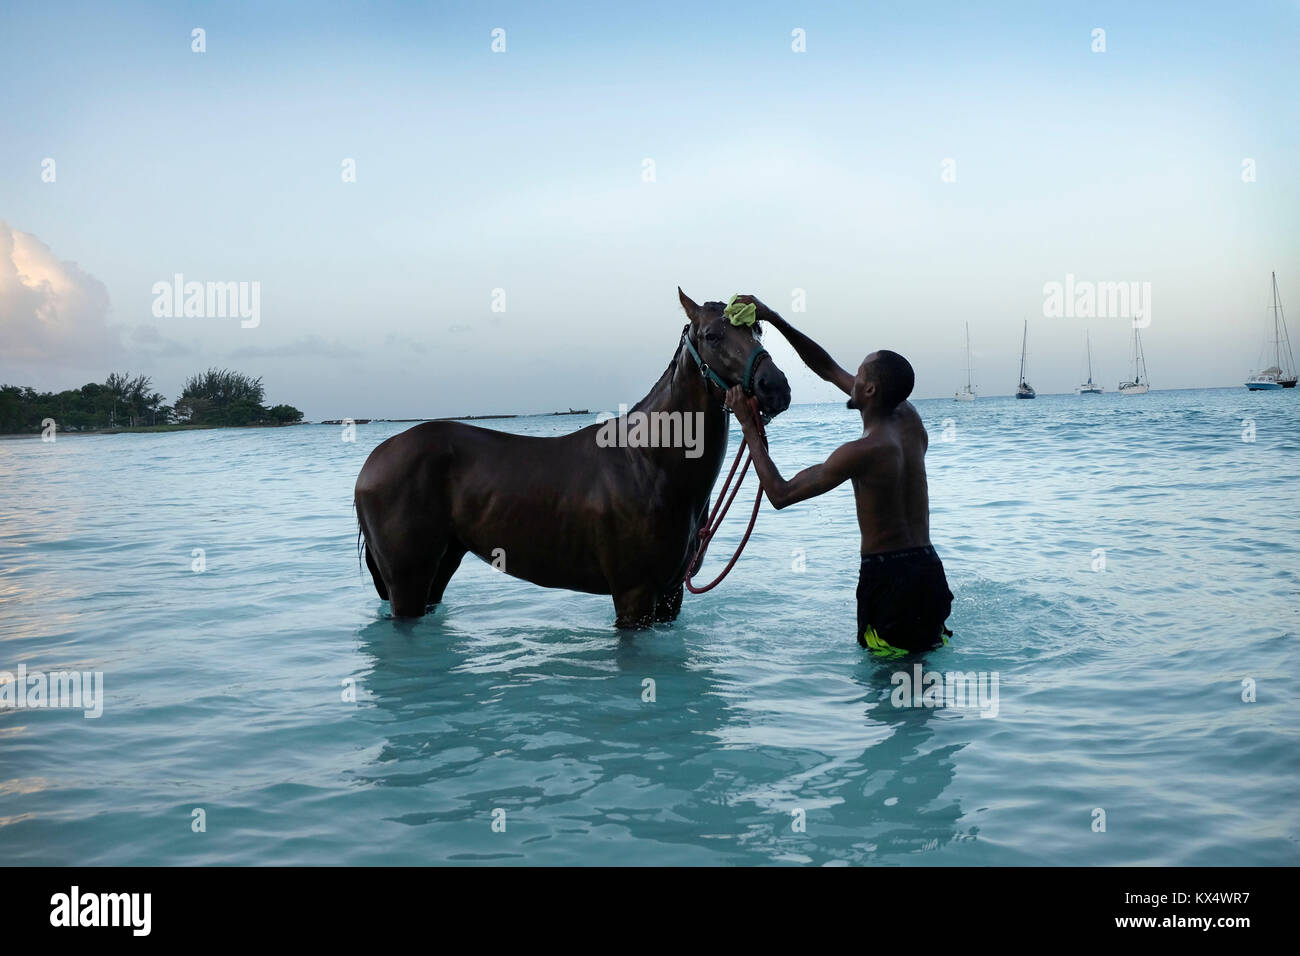 Bridgetown, Barbados. 07th Jan, 2018. A stable hand bathes a race horse at dawn after the first day of the new horse racing season in Barbados yesterday (Saturday 6th) at Browns Beach near Bridgetown, Barbados.   Horse Racing is an important part of Barbados' heritage and dates back to 1845 when the tiny island was part of the British Empire. Kiran Ridley Credit: Michael Olivers/Alamy Live News Stock Photo